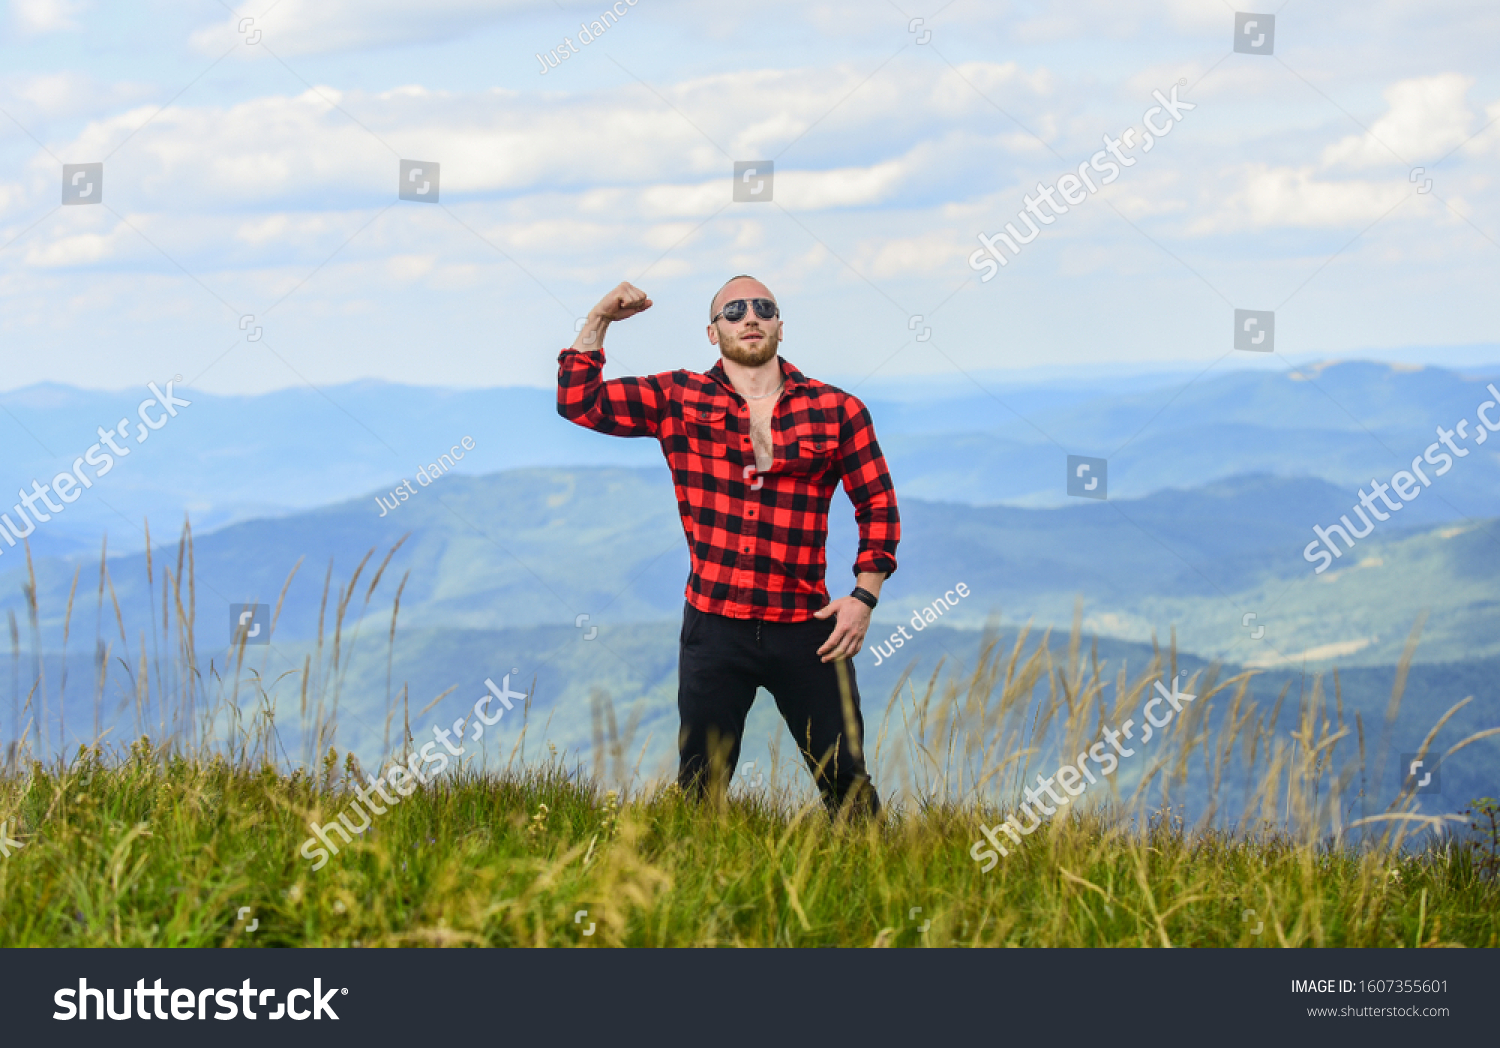 Power of nature. Man stand on top of mountain landscape background. Natural power. Masculine power. Tourist walking mountain hill. Hiking concept. Discover world. Masculinity and male energy. #1607355601